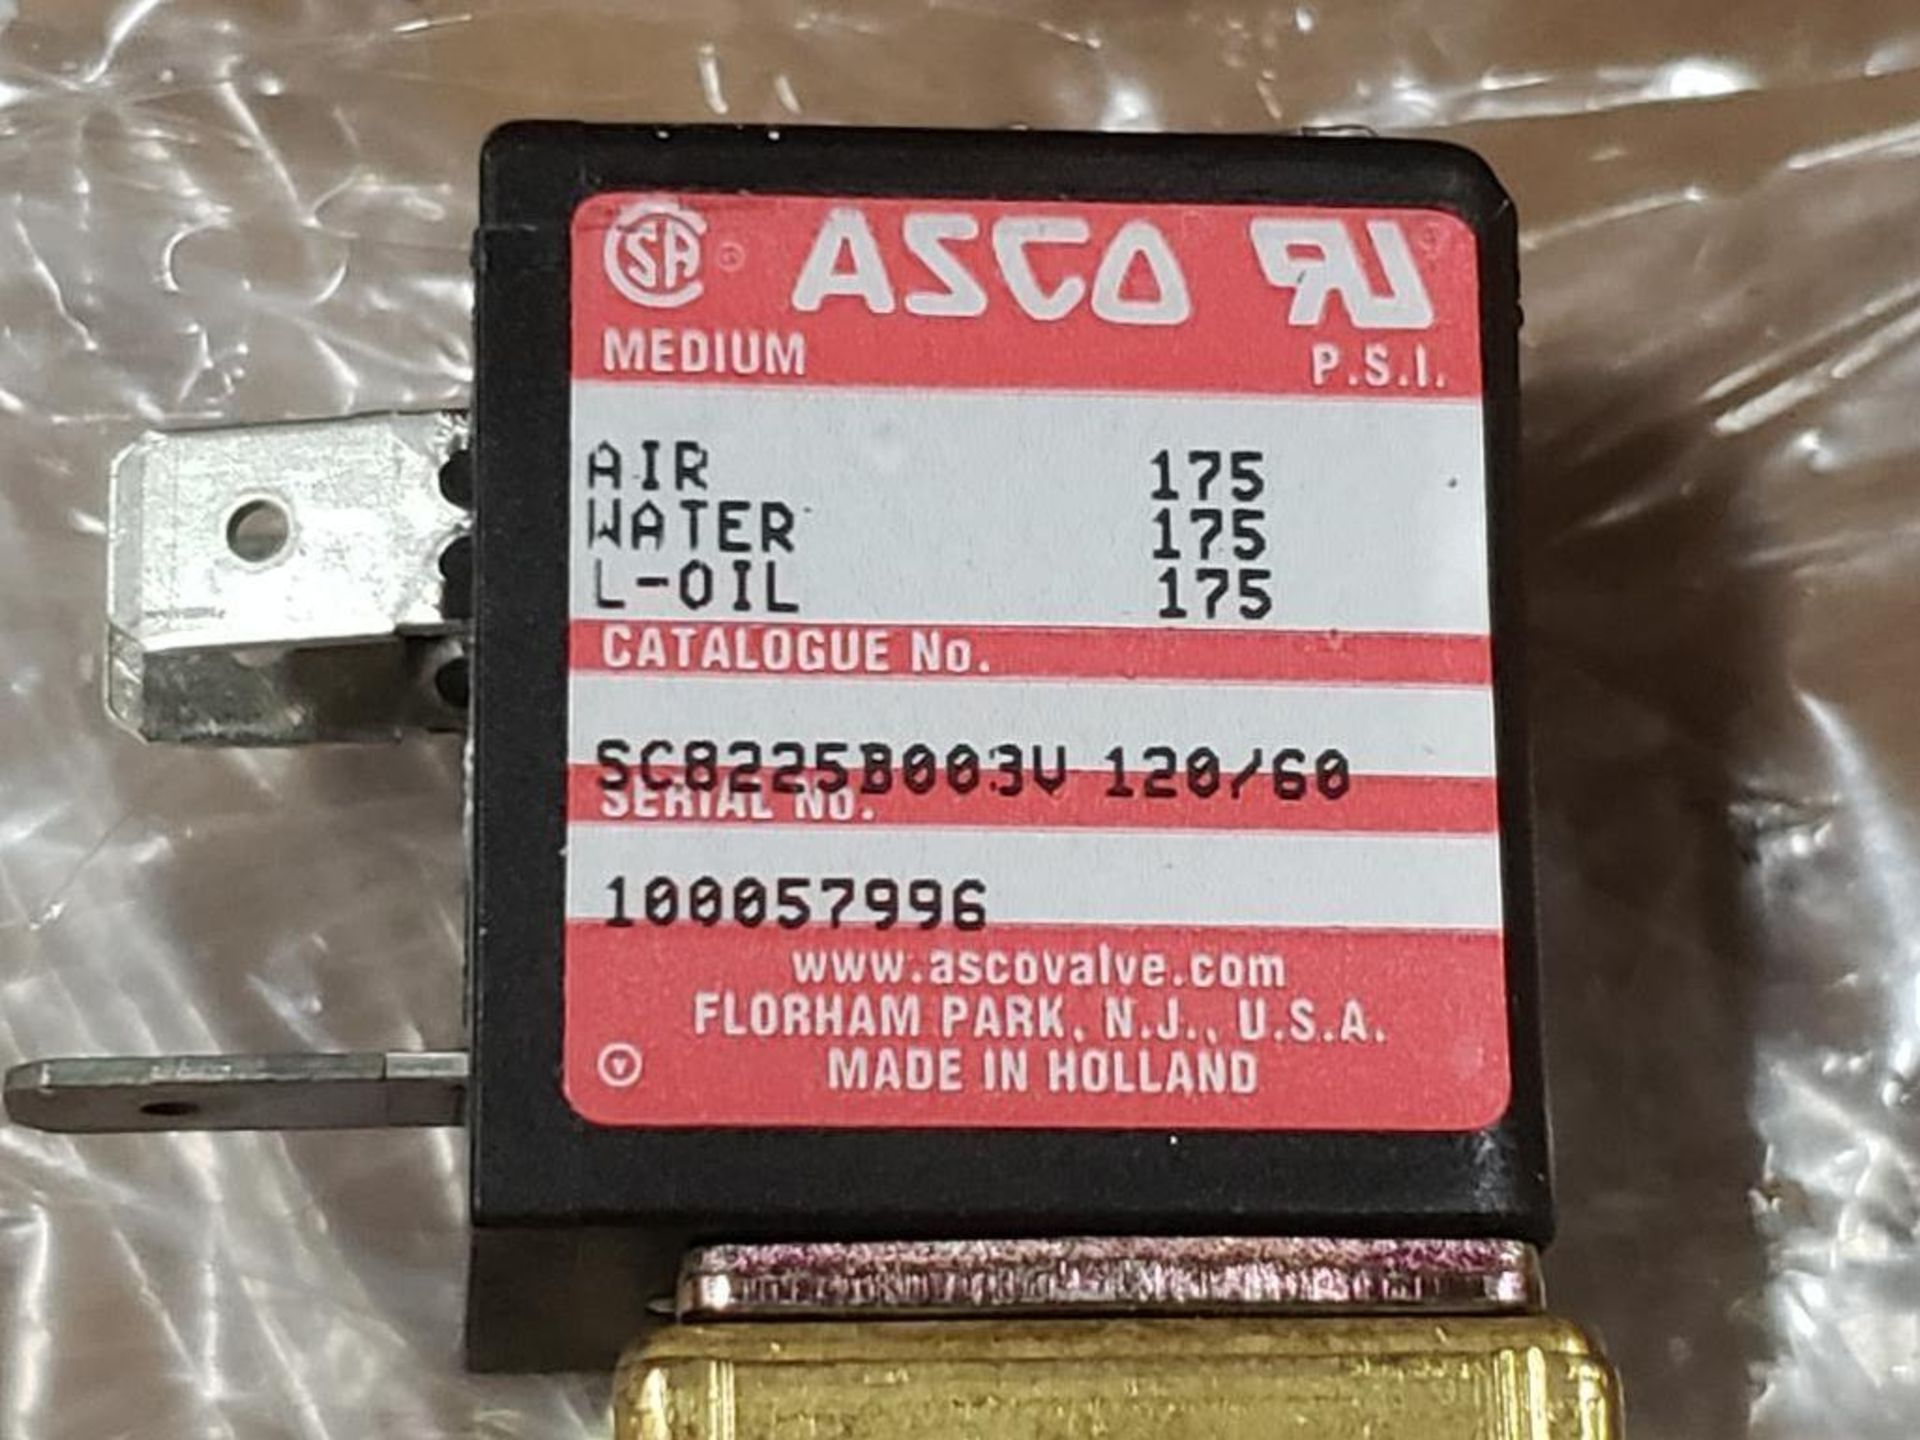 Qty 20 - ASCO SC8225B003V 120/60 solenoid valve. 175psi air/water/l-oil. New in package. - Image 2 of 2